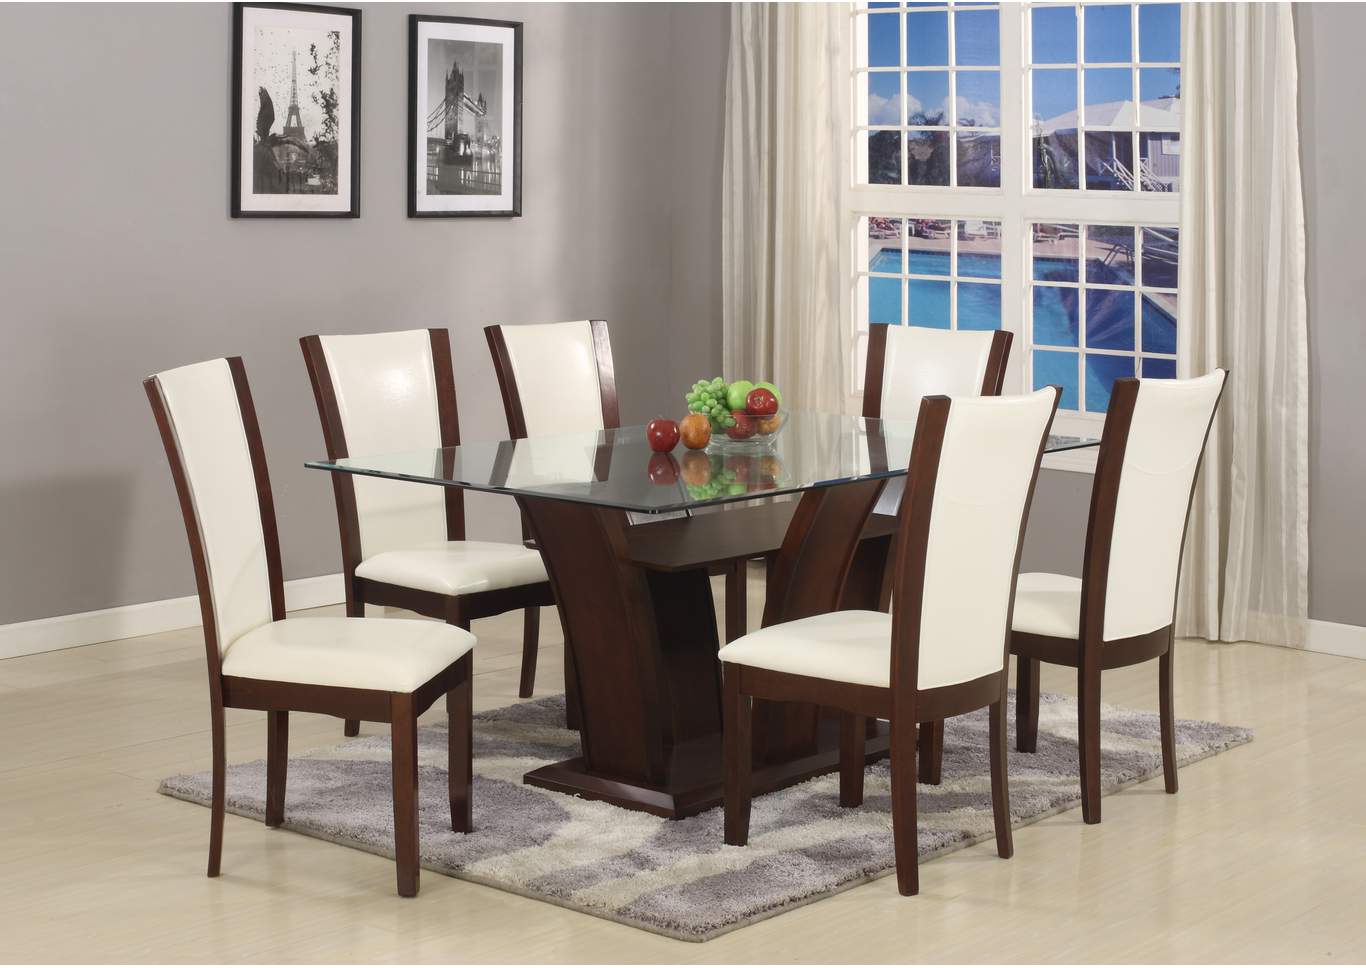 Camelia Rectangular Glass Top Dining Room Table w/4 White Side Chairs,Crown Mark